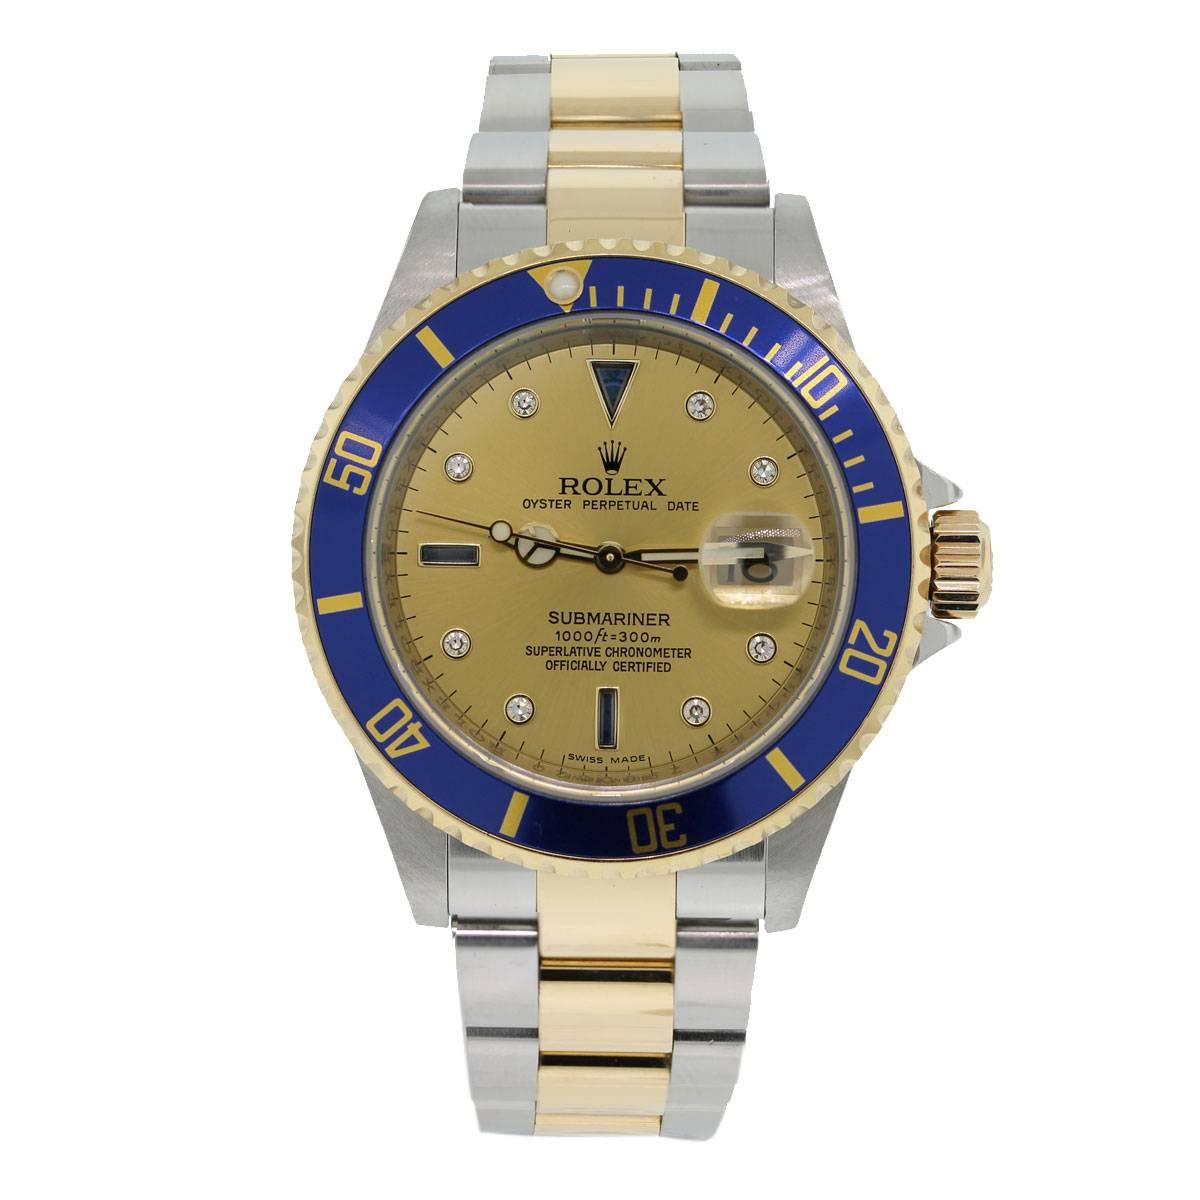 Brand: Rolex
Style: Submariner
MPN: 16613
Serial: "A" Serial
Case Material: Stainless steel
Case Diameter: 40mm
Bezel: Unidirectional 18k yellow gold bezel with blue insert
Dial: Champagne diamond and blue sapphire serti dial